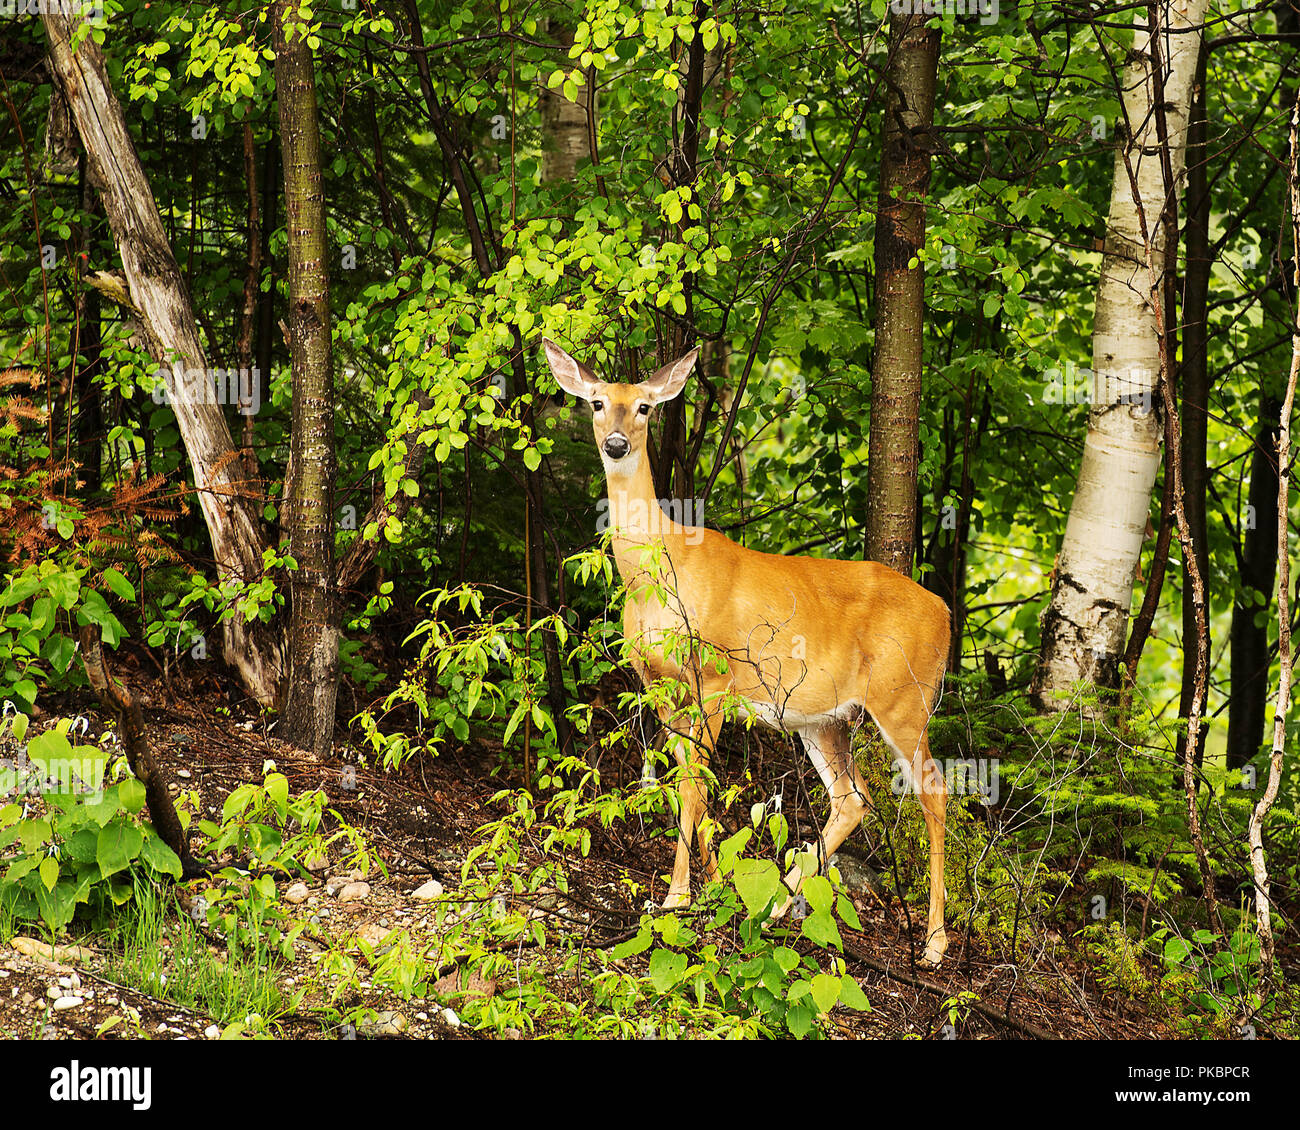 Deer animal in the forest displaying body, head, ears, eye, nose, legs with a foliage background of trees in its surrounding and environment. Stock Photo